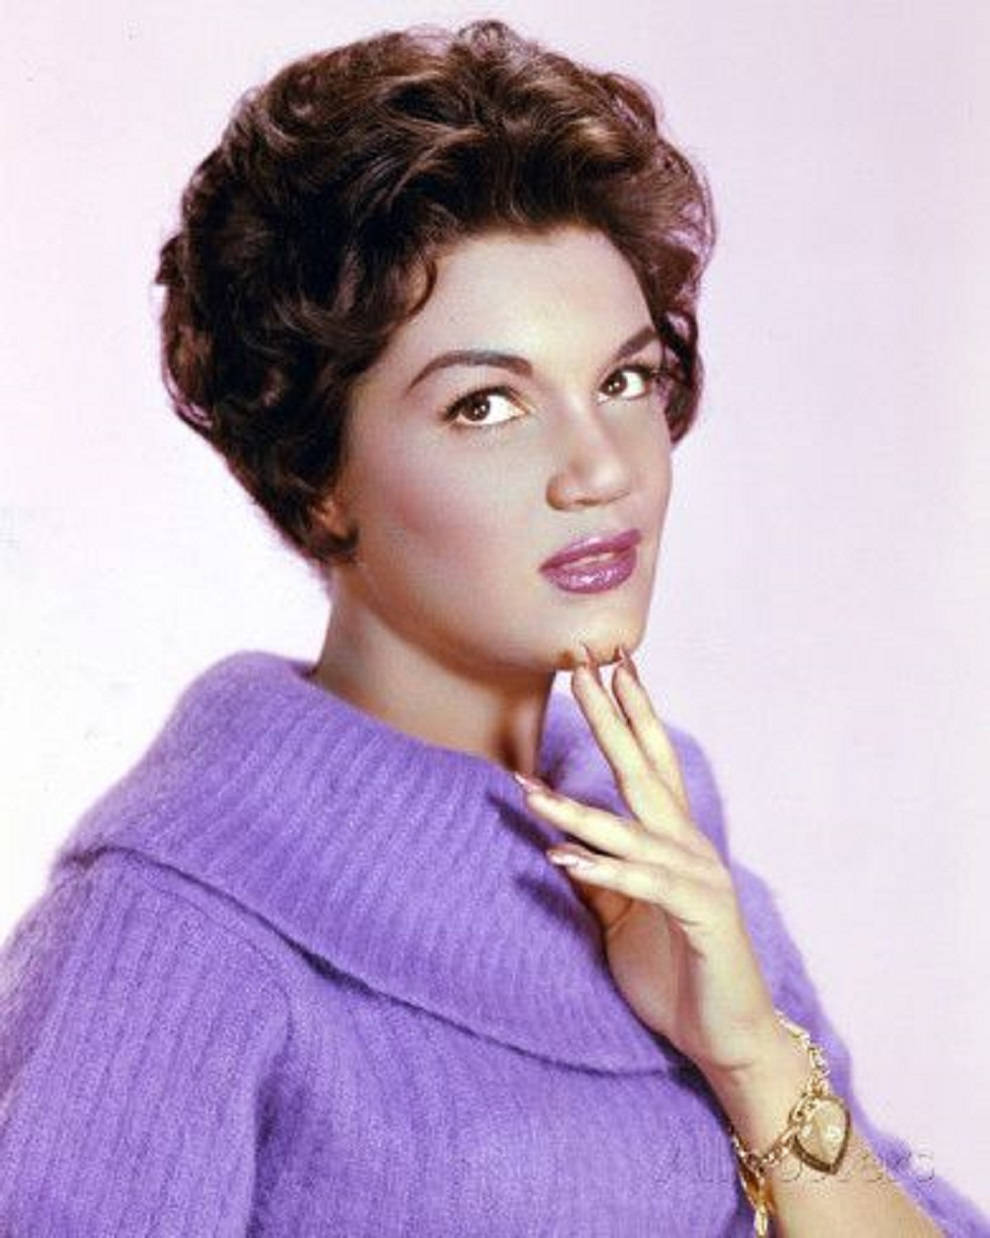 Iconic Portrait of American Singer and Actress Connie Francis, 1960 Wallpaper